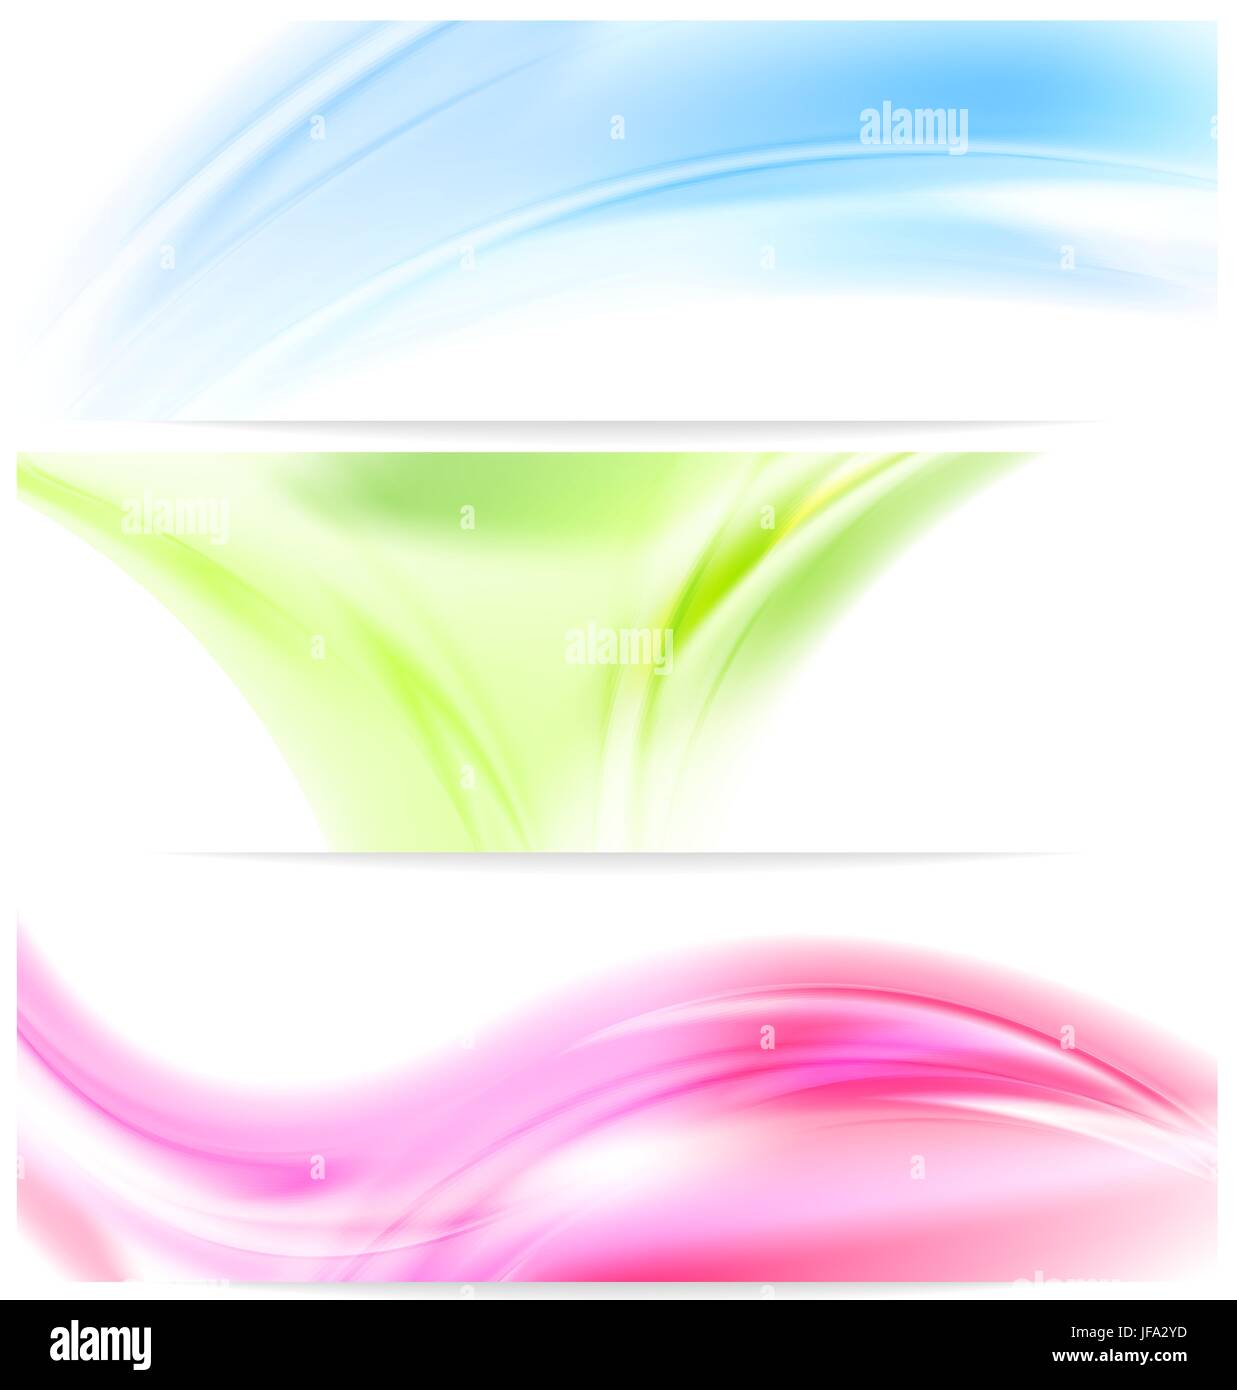 Abstract colorful wavy banners Stock Photo